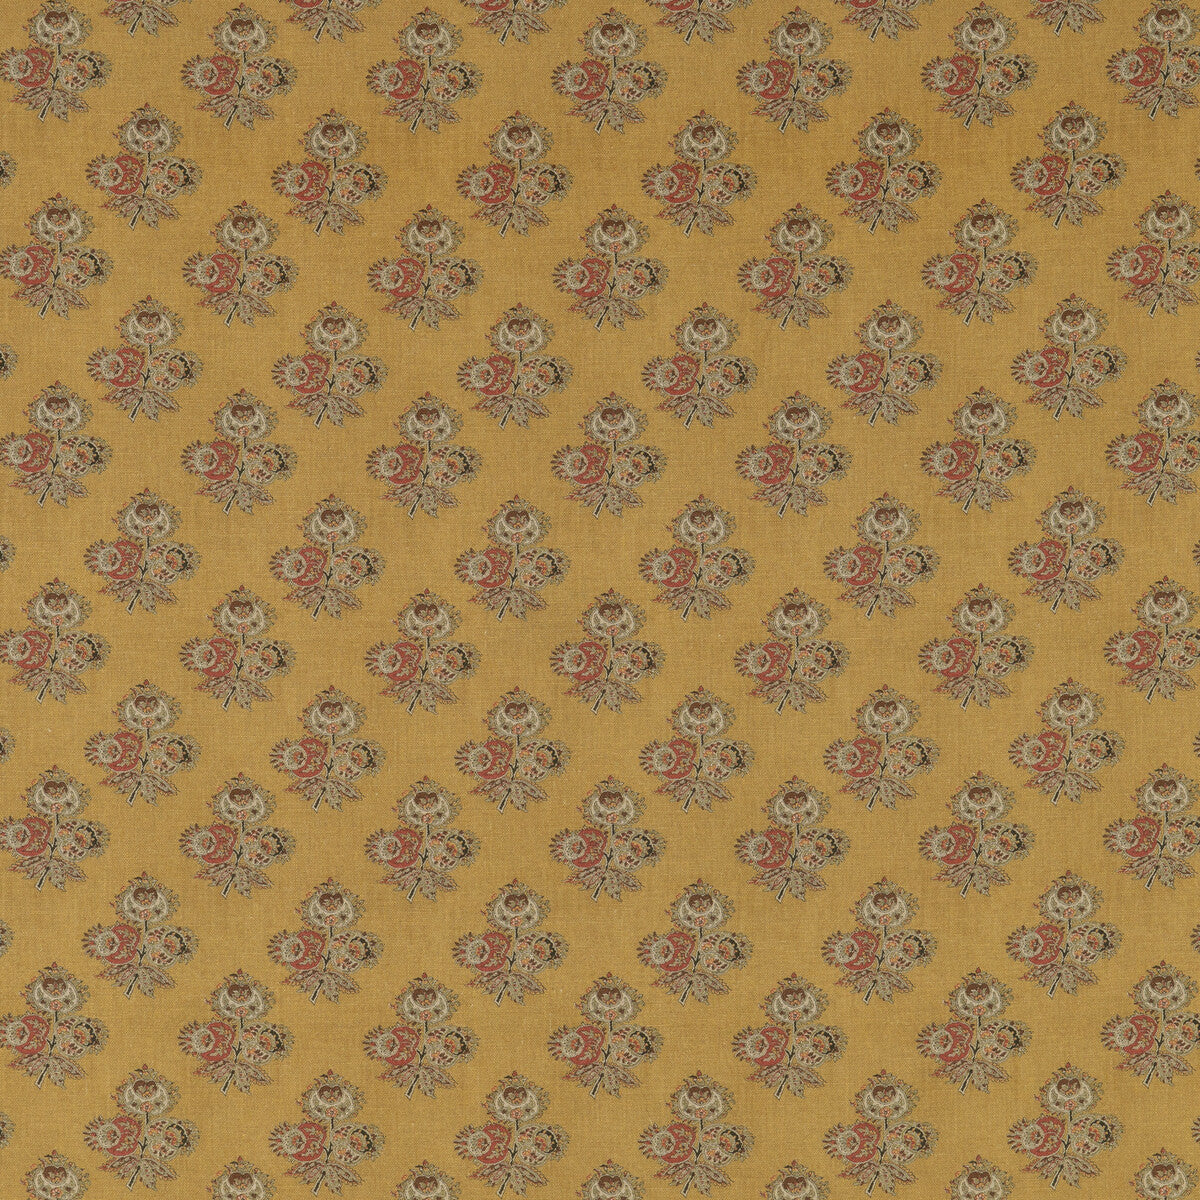 Poppy Paisley fabric in ochre color - pattern BP10823.3.0 - by G P &amp; J Baker in the Coromandel Small Prints collection